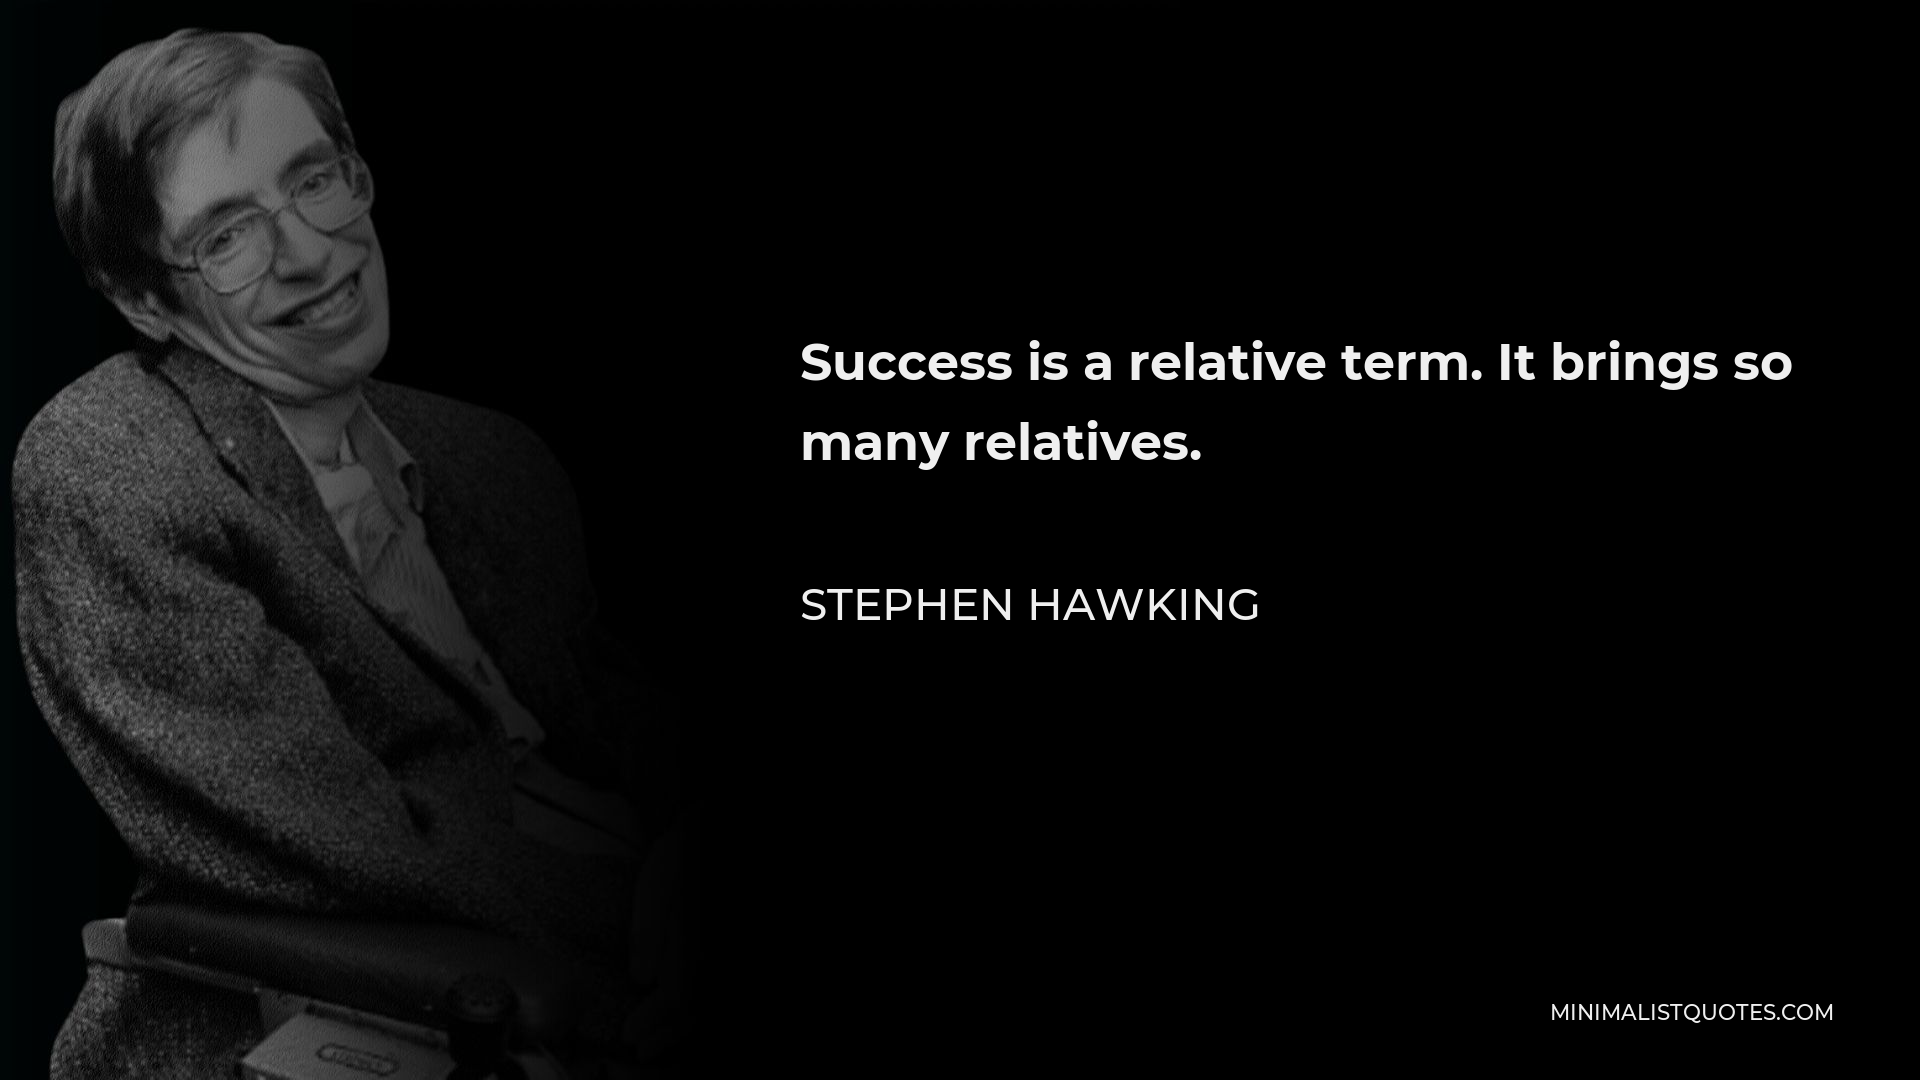 Stephen Hawking Quote - Success is a relative term. It brings so many relatives.